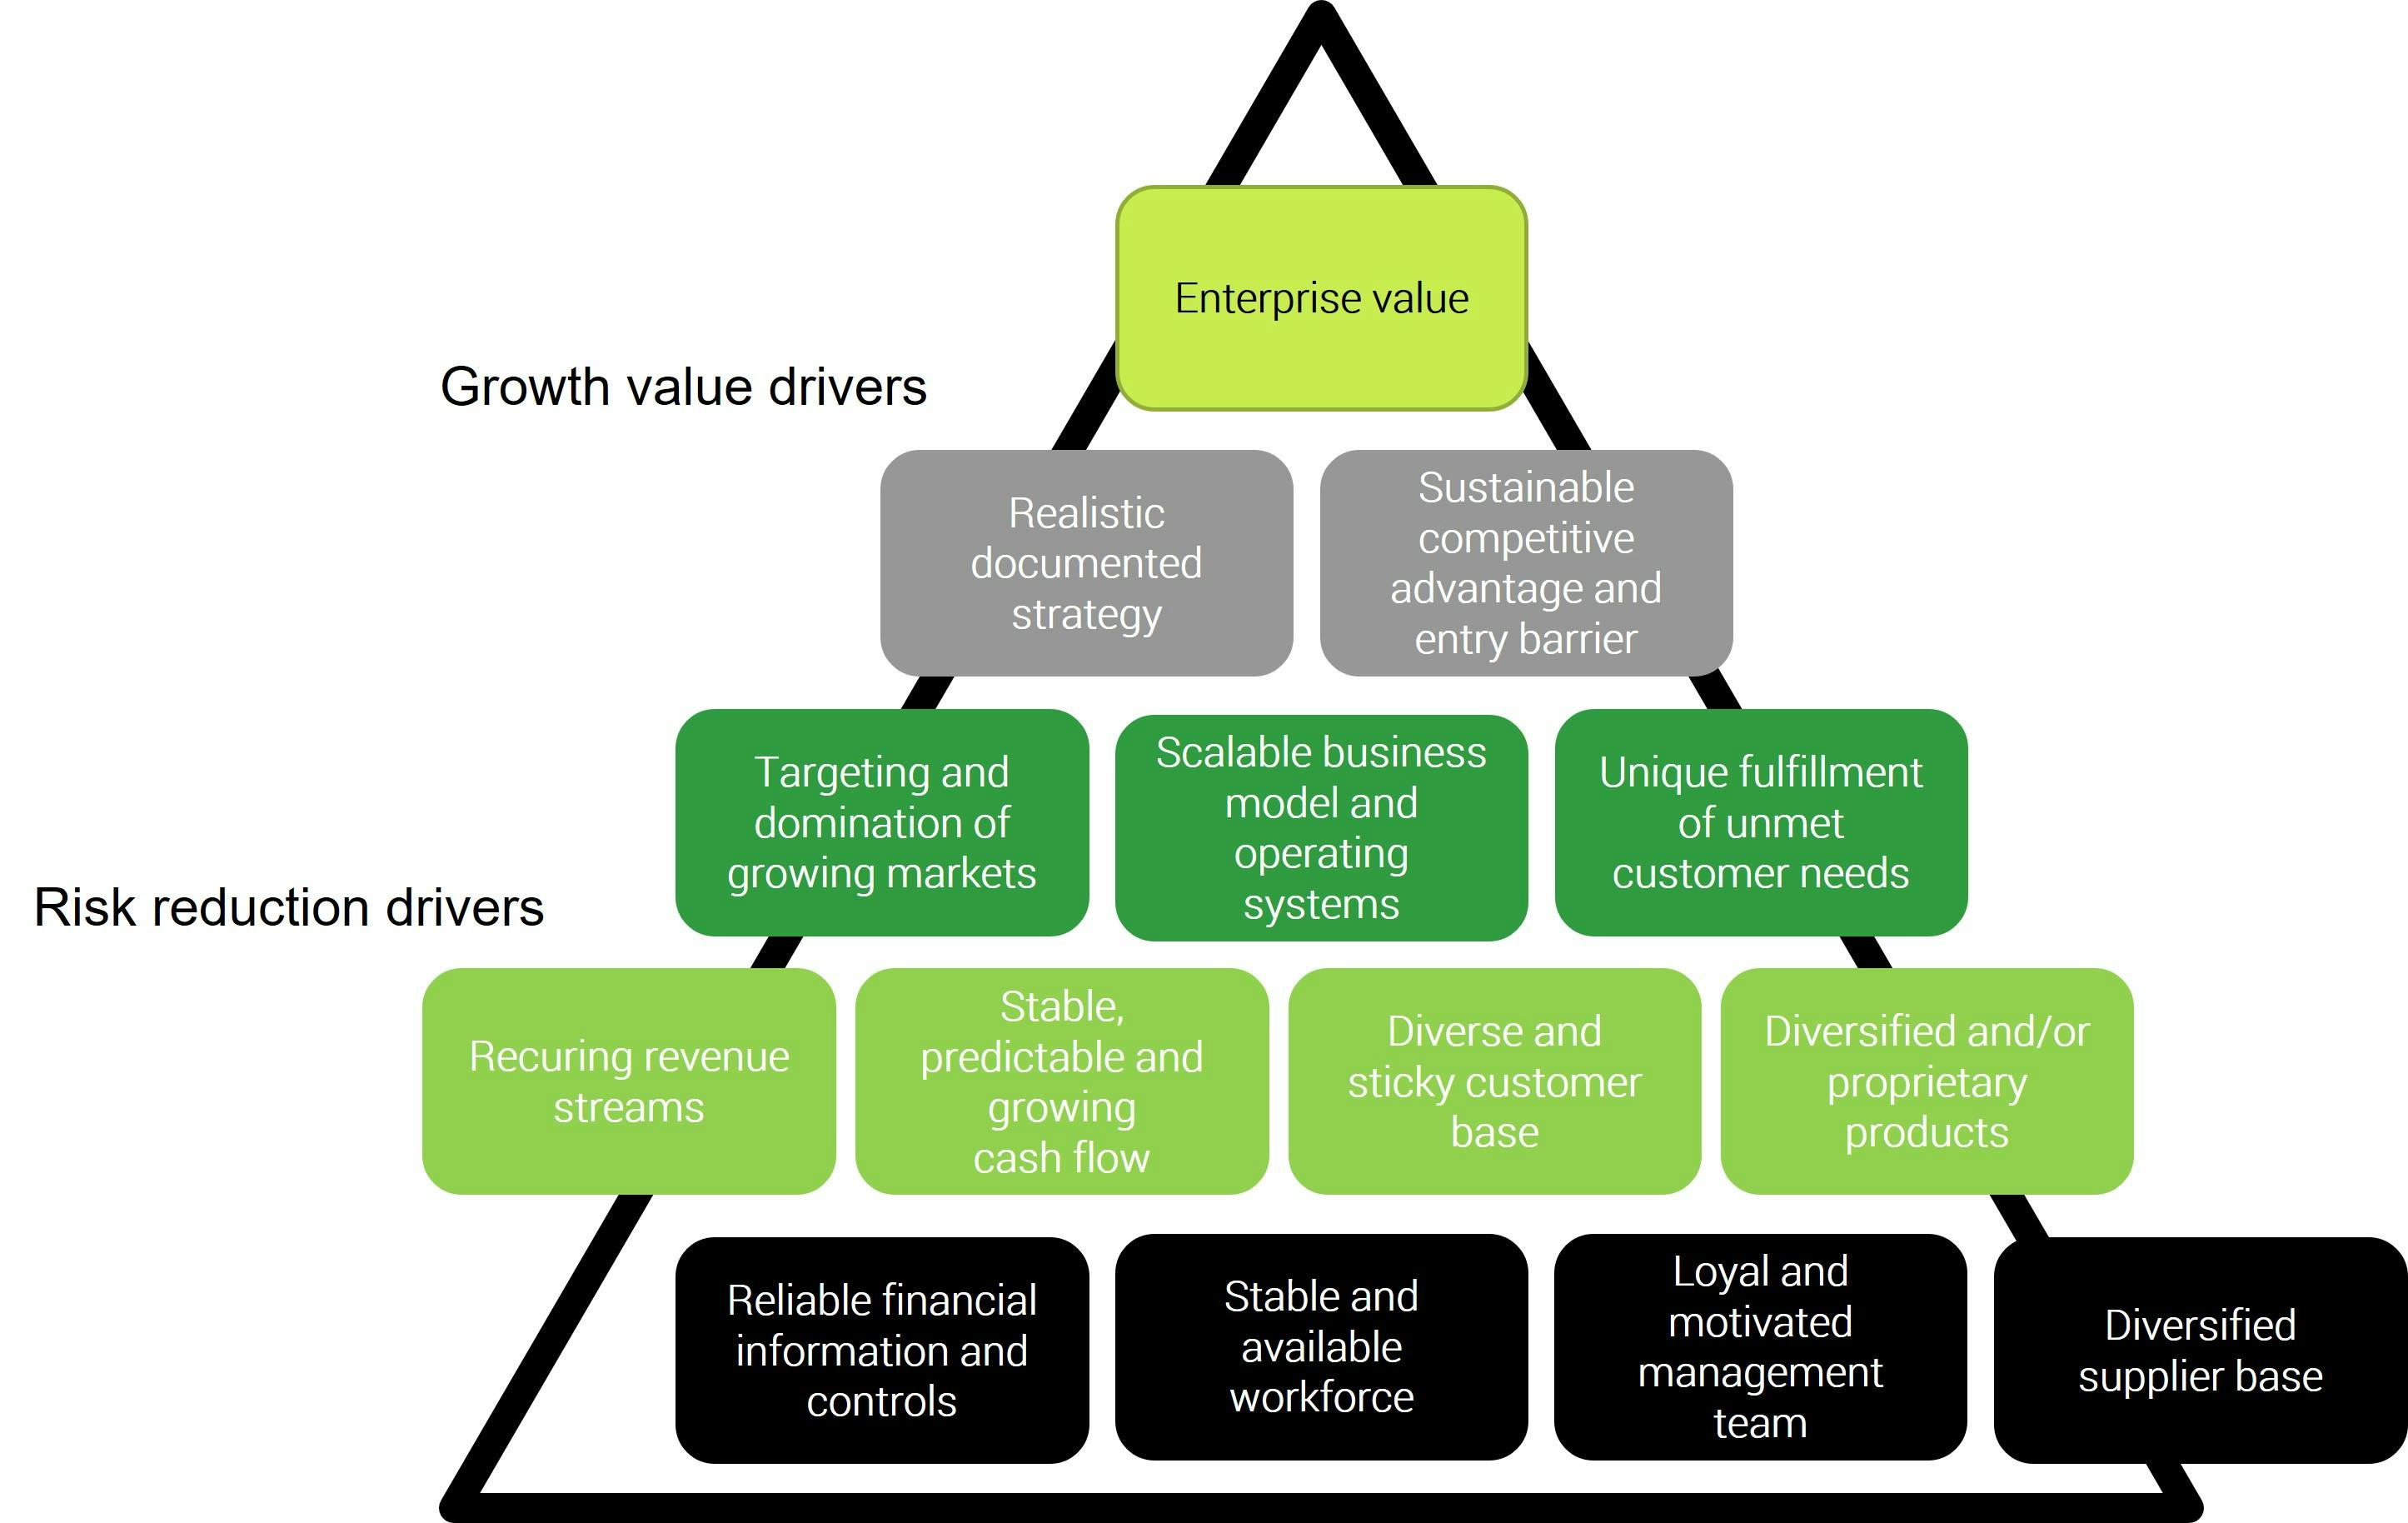 Strategic value creation plan, growth drivers and risk reduction drivers